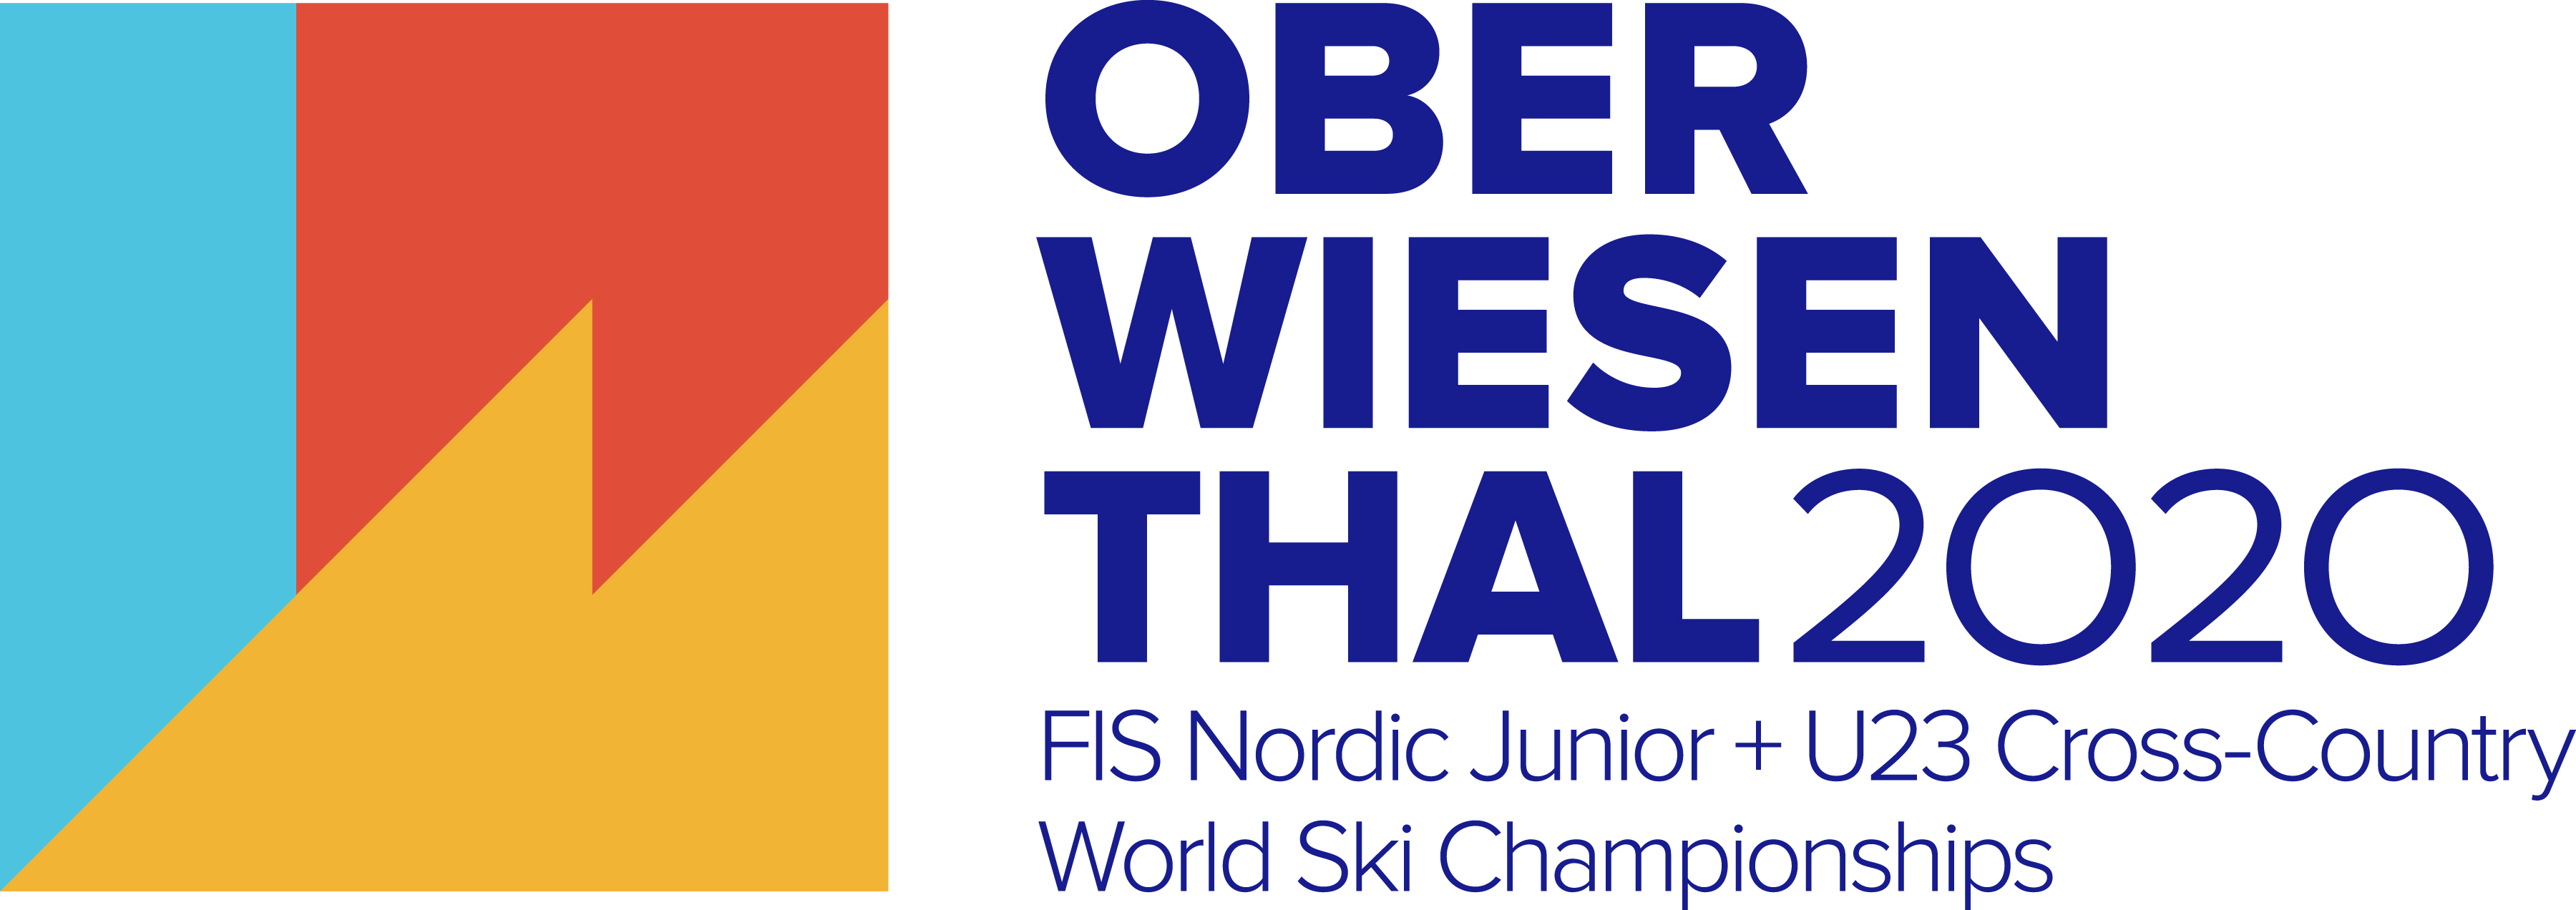 Schedule for the Oberwiesenthal, Germany Junior / U23 Worlds 